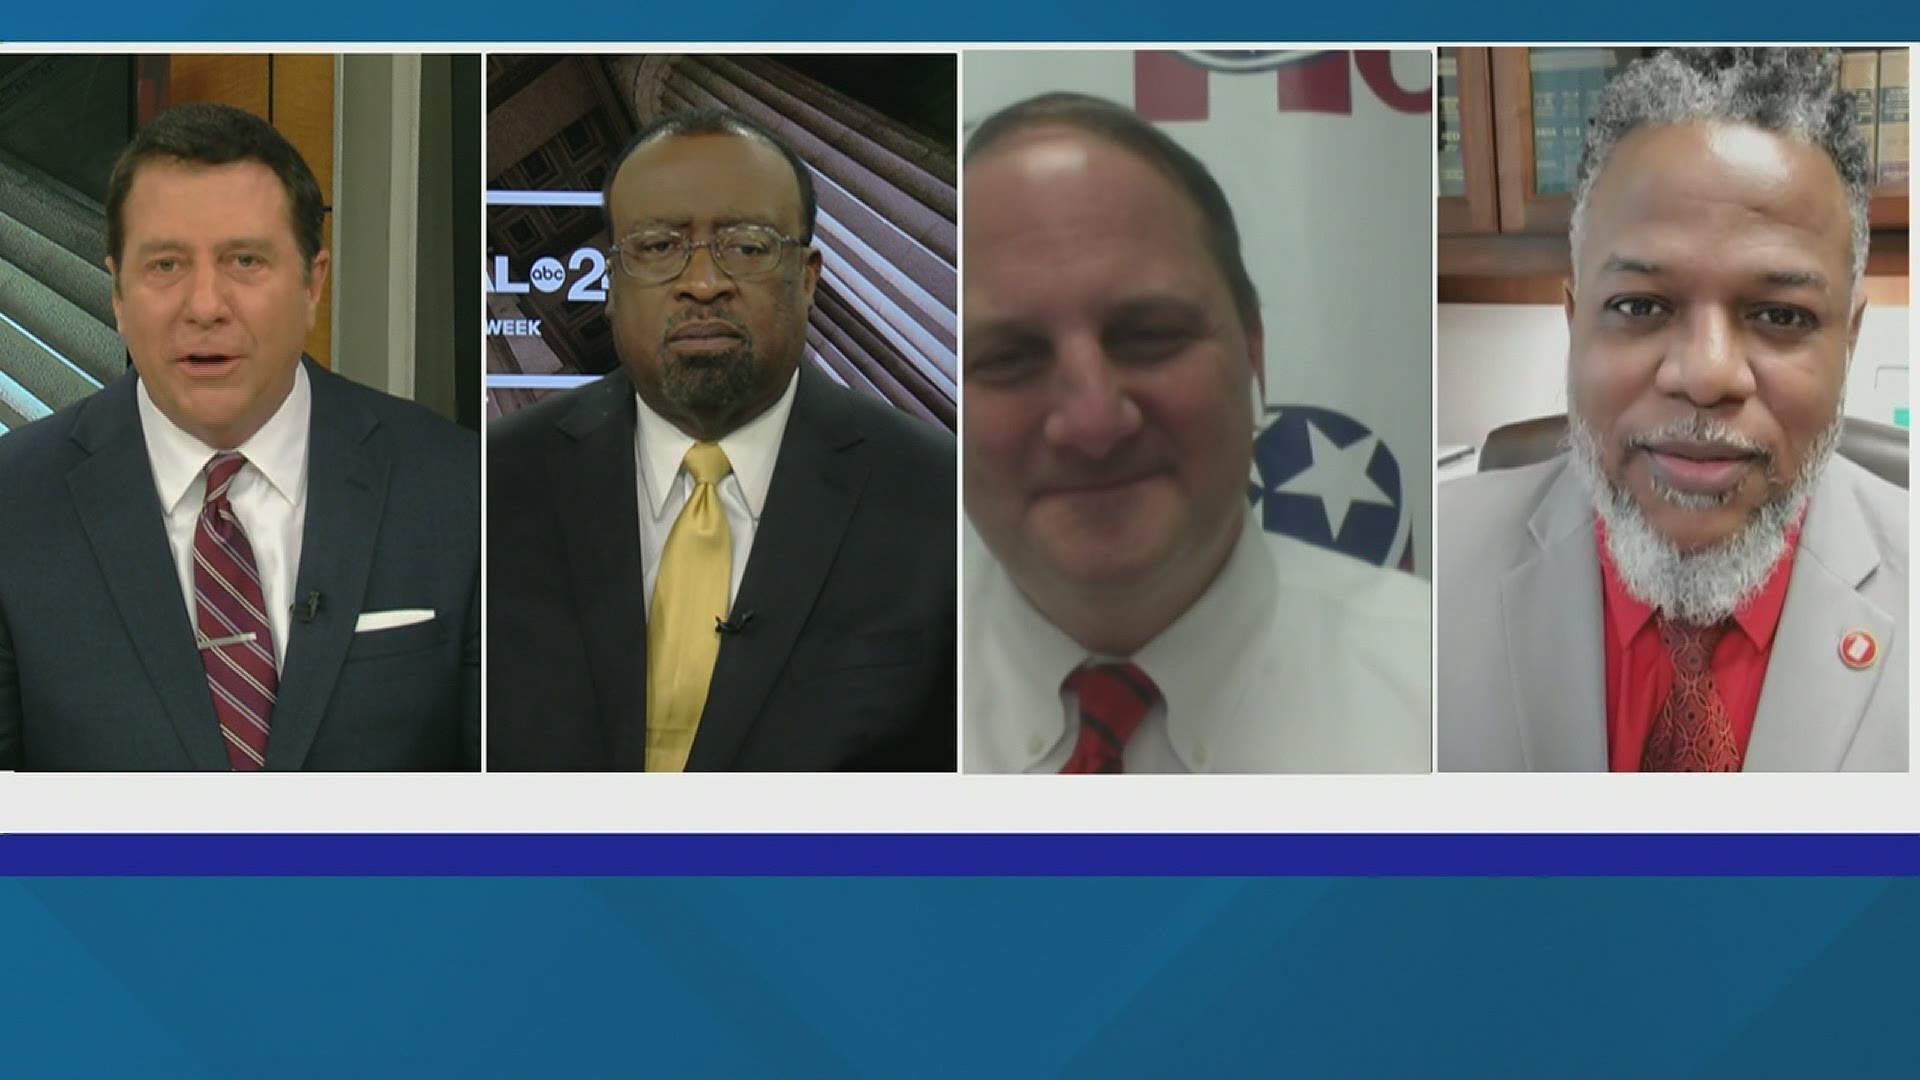 The panel discusses state lawmakers in Nashville facing a pandemic, funding and education crisis. Also a criminal probe involving many, including raids by the FBI.